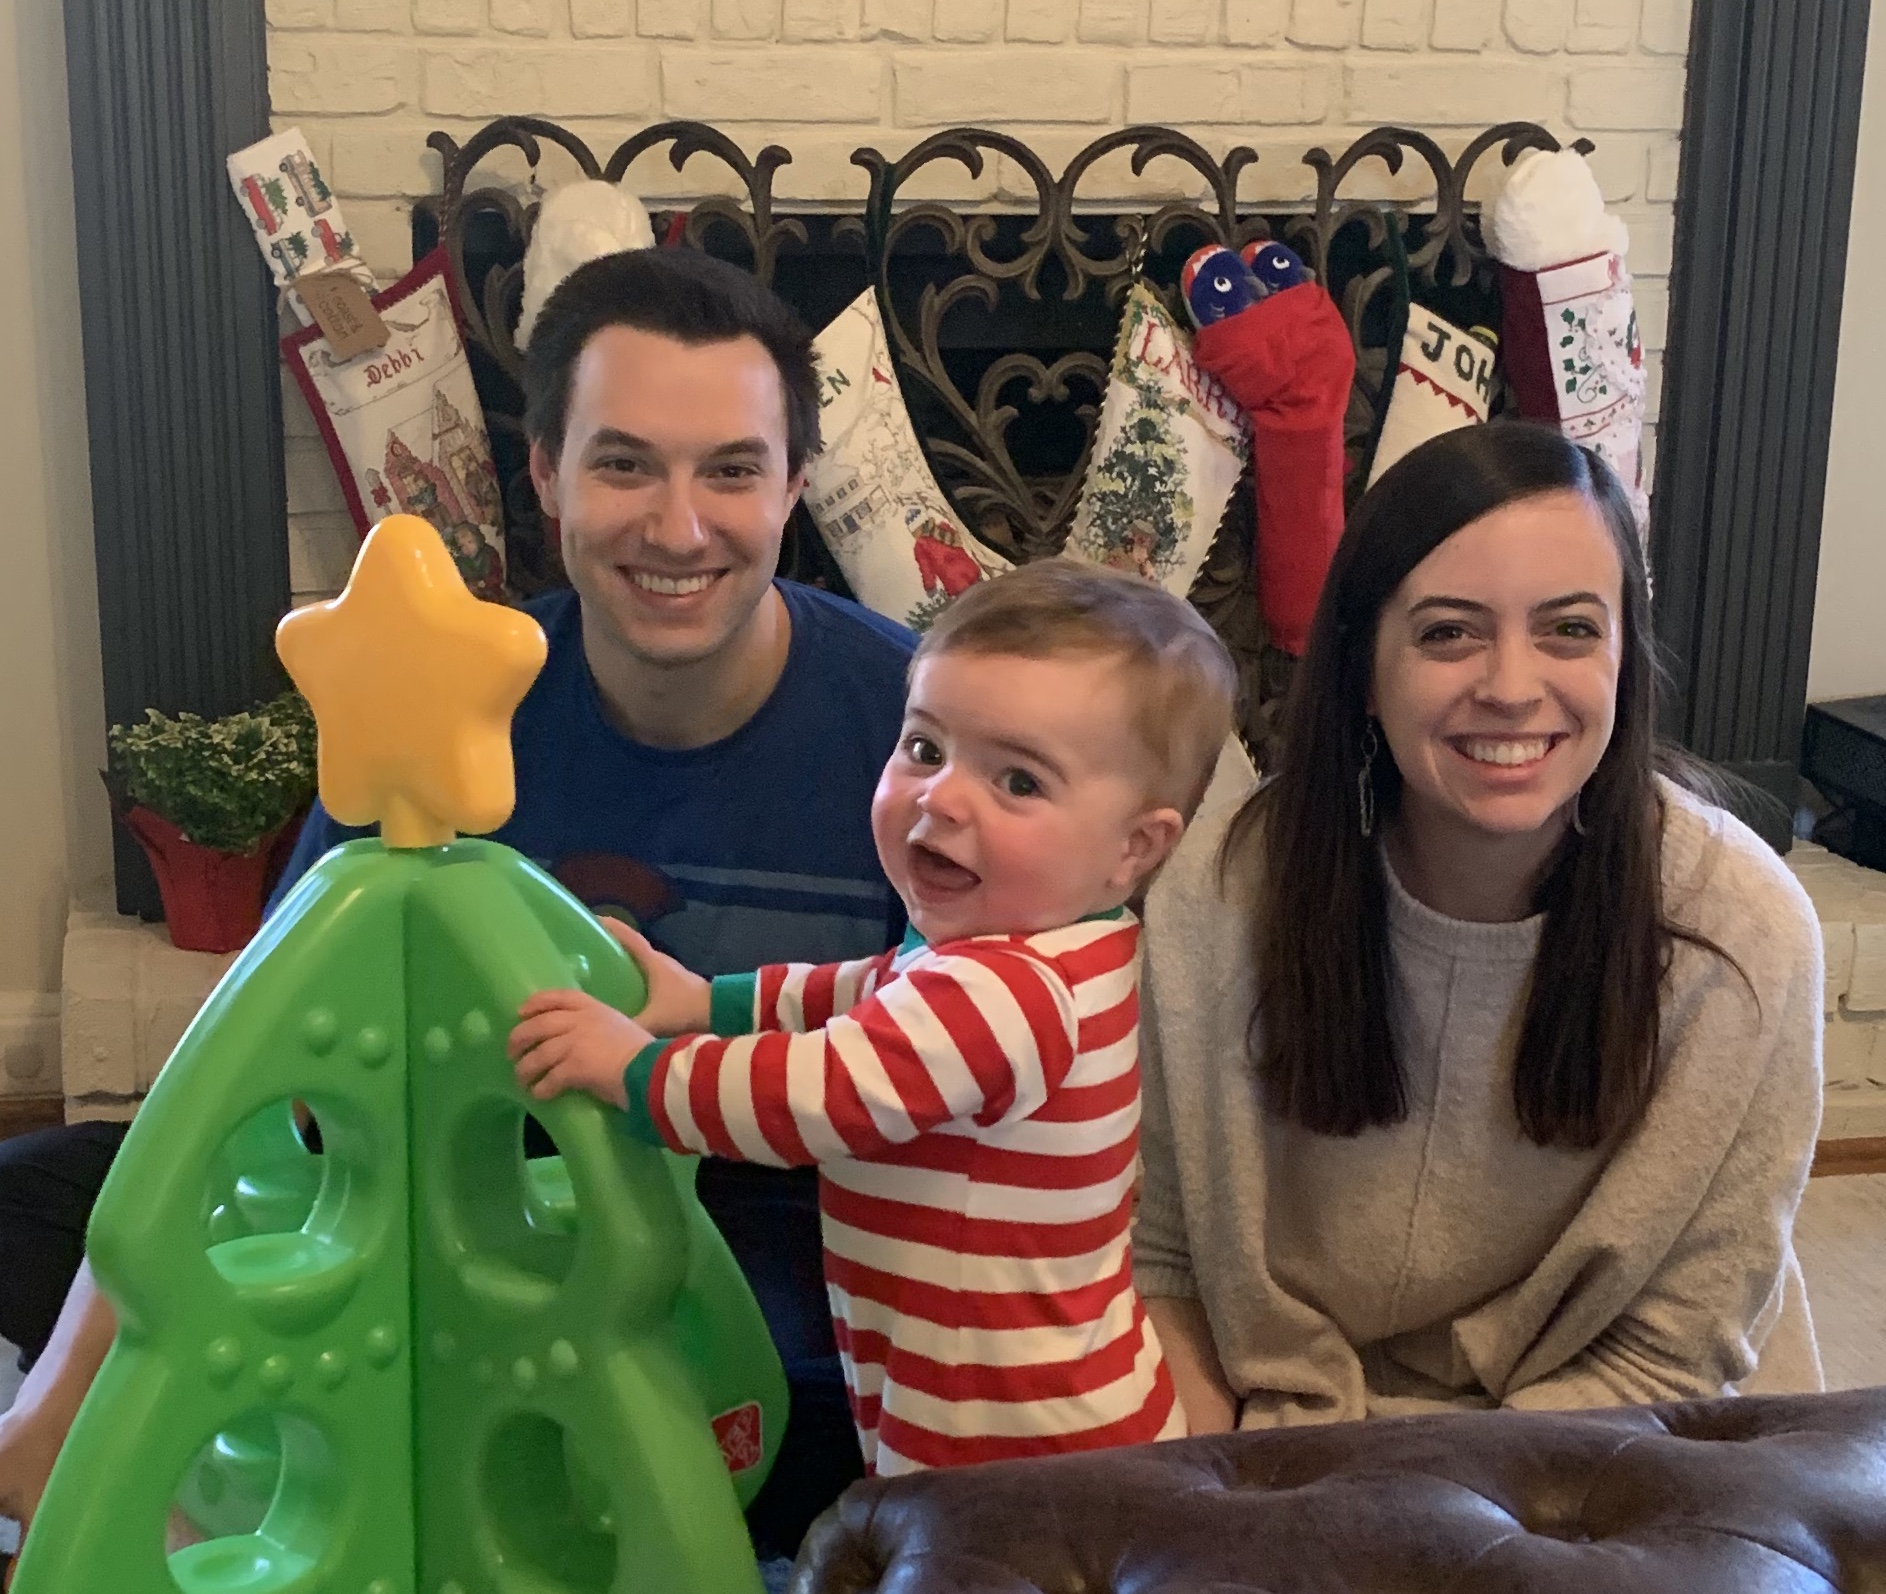 Me, my wife, and my 1-yr old son, sitting in front of a plastic Christmas tree, looking very cute.